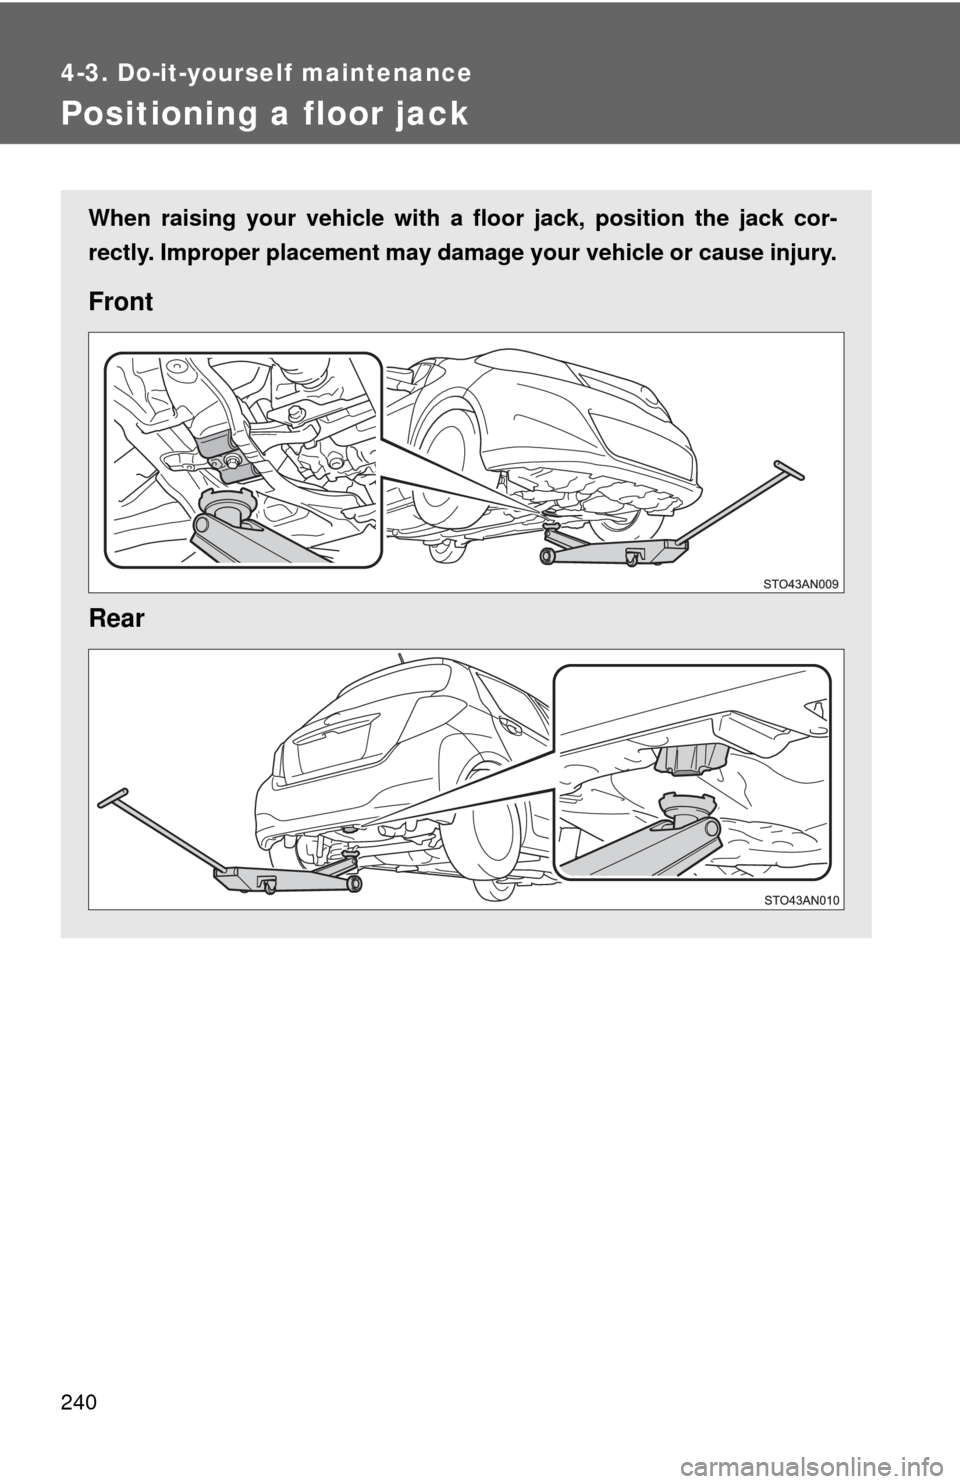 TOYOTA YARIS 2014 3.G Owners Manual 240
4-3. Do-it-yourself maintenance
Positioning a floor jack
When raising your vehicle with a floor jack, position the jack cor-
rectly. Improper placement may damage your vehicle or cause injury.
Fro